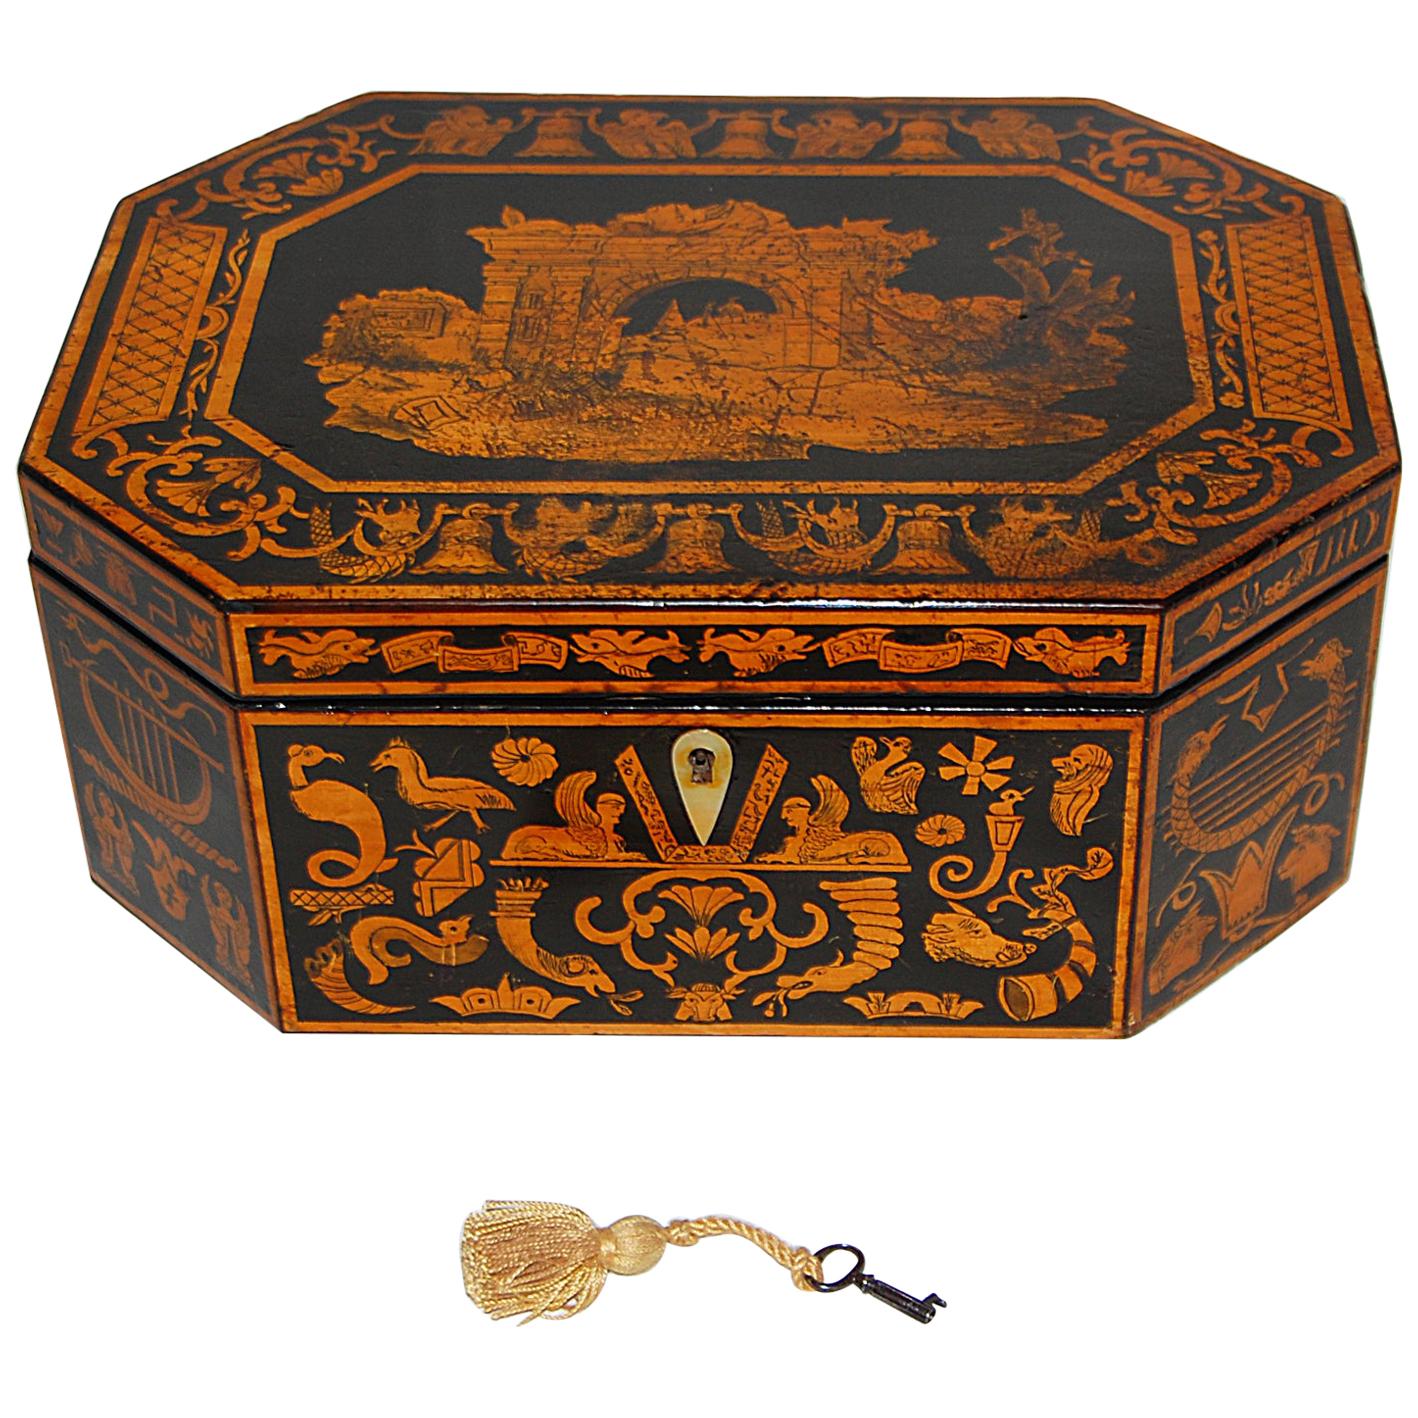 English Georgian Penwork Octagonal Box with Classical Scenes and Motifs